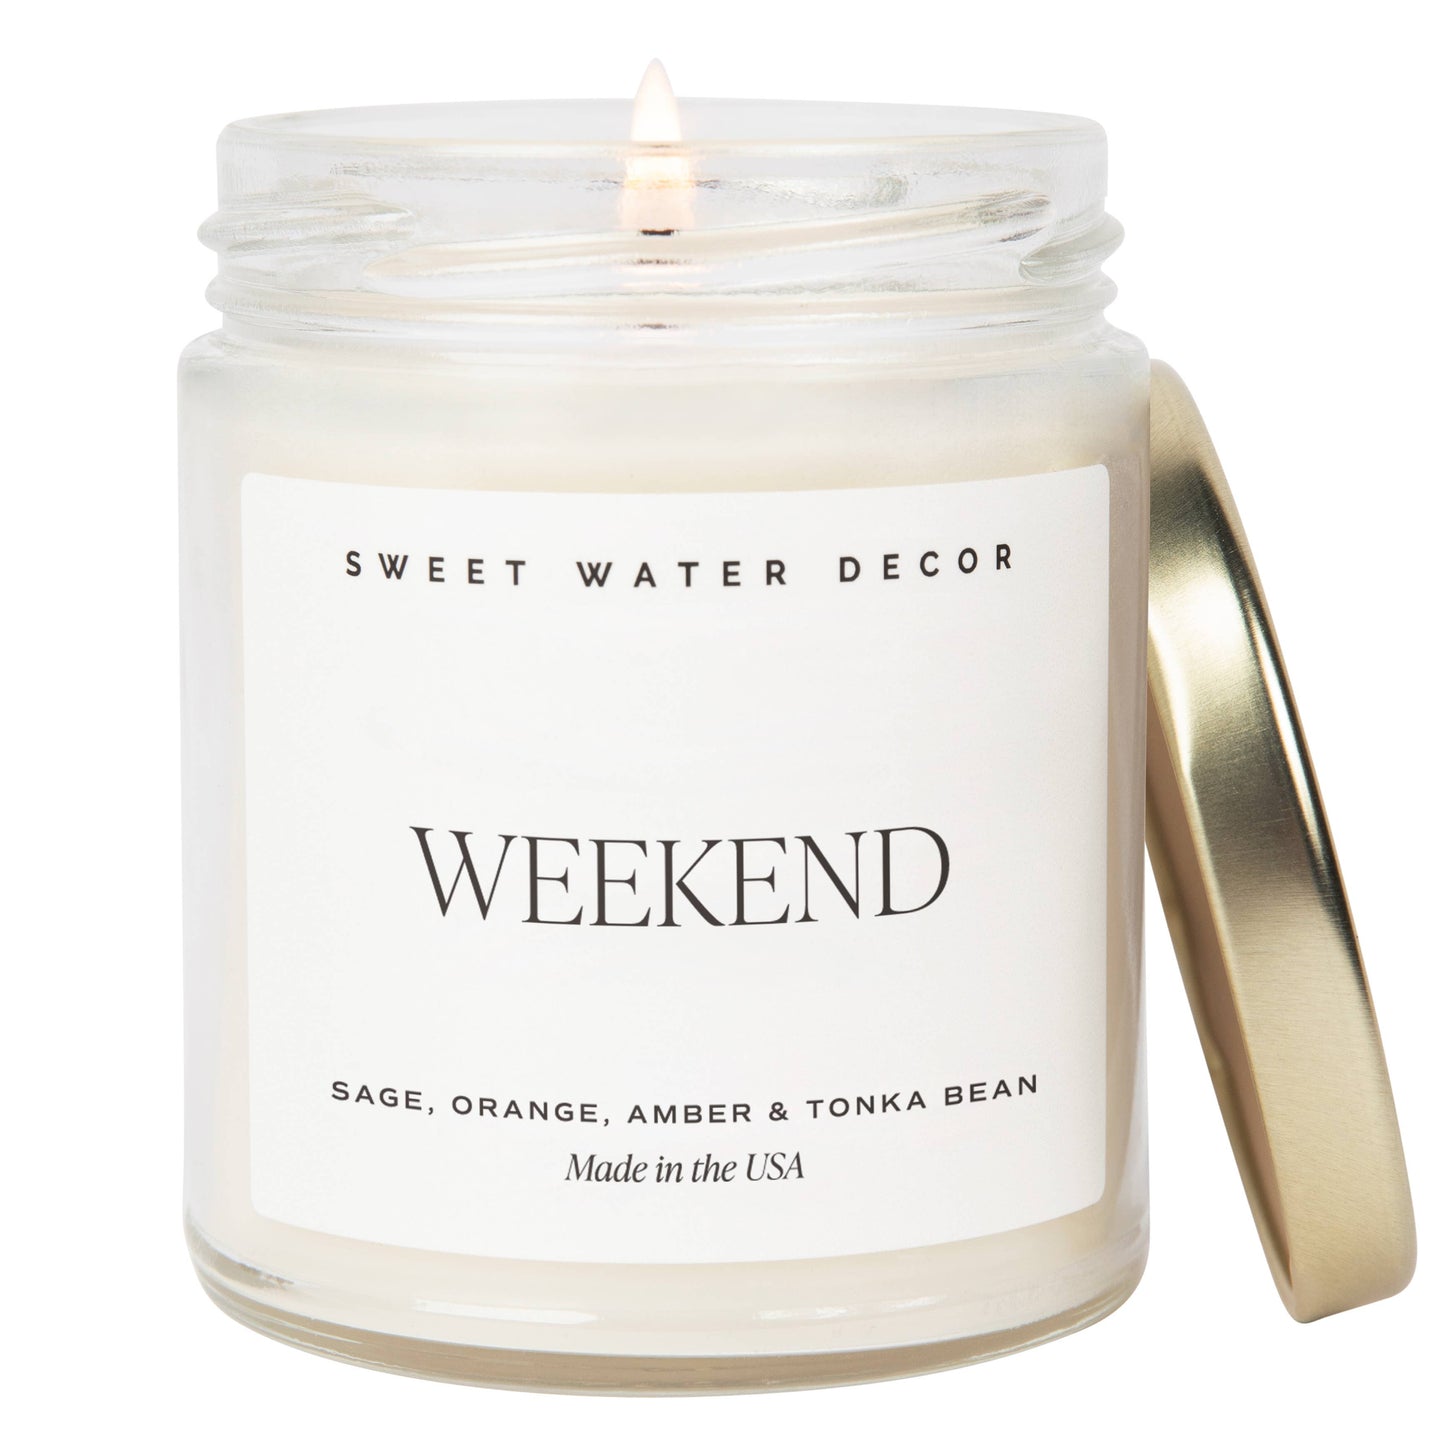 Sweet Water Decor - Weekend 9 oz Soy Candle - Home Decor & Gifts